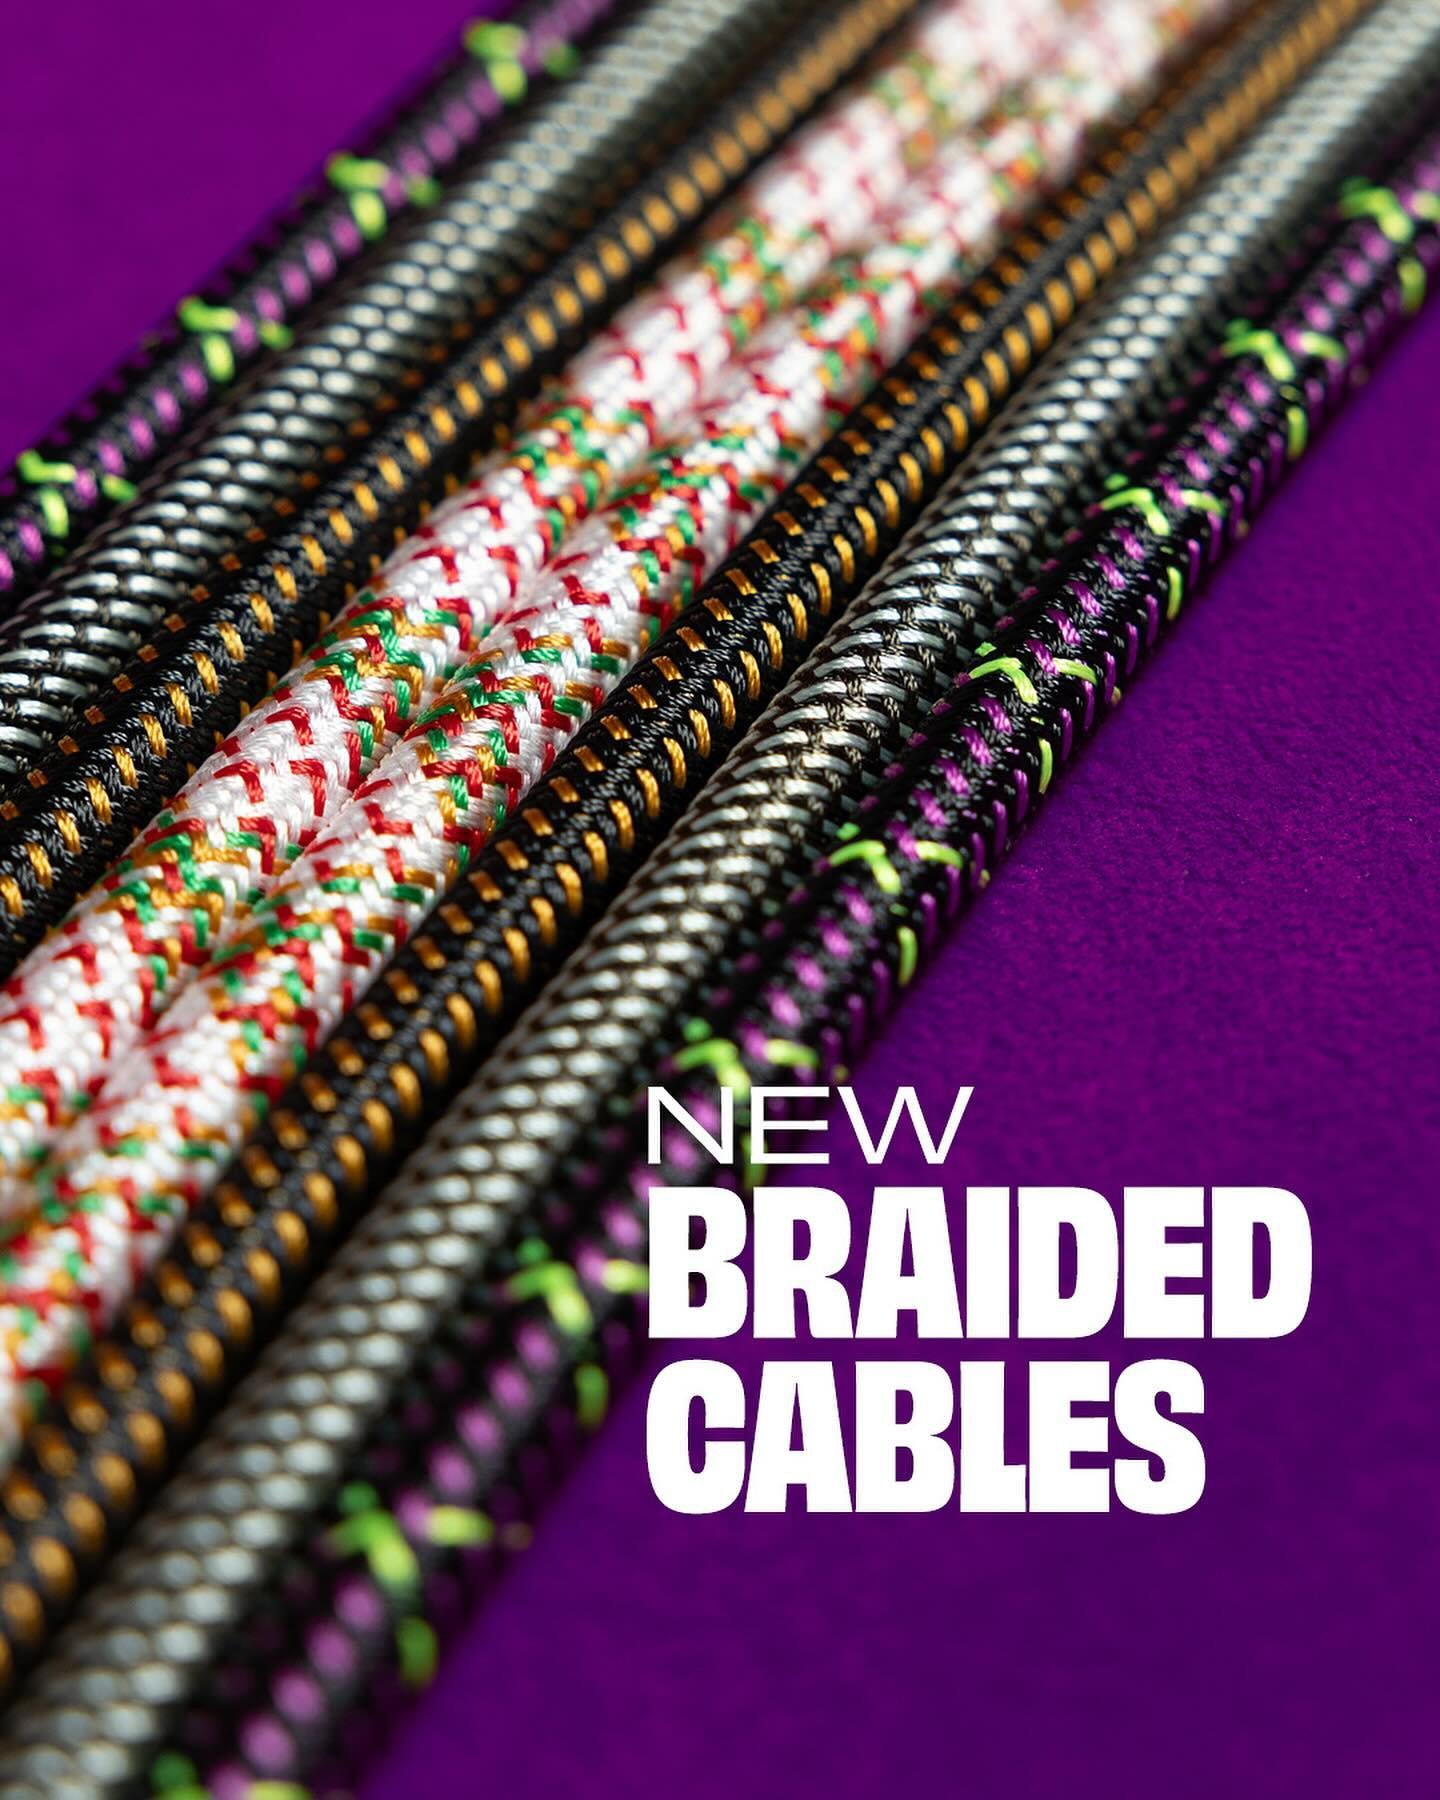 NEW! Introducing 4 new colors to the @ernieball Braided Cables collection!&nbsp;🌈
&nbsp;
🧐 Which one is your favorite?
&nbsp;
#ernie #ernieball #braided #braidedcables #cables #ernieballcables #newcolours #algambenelux